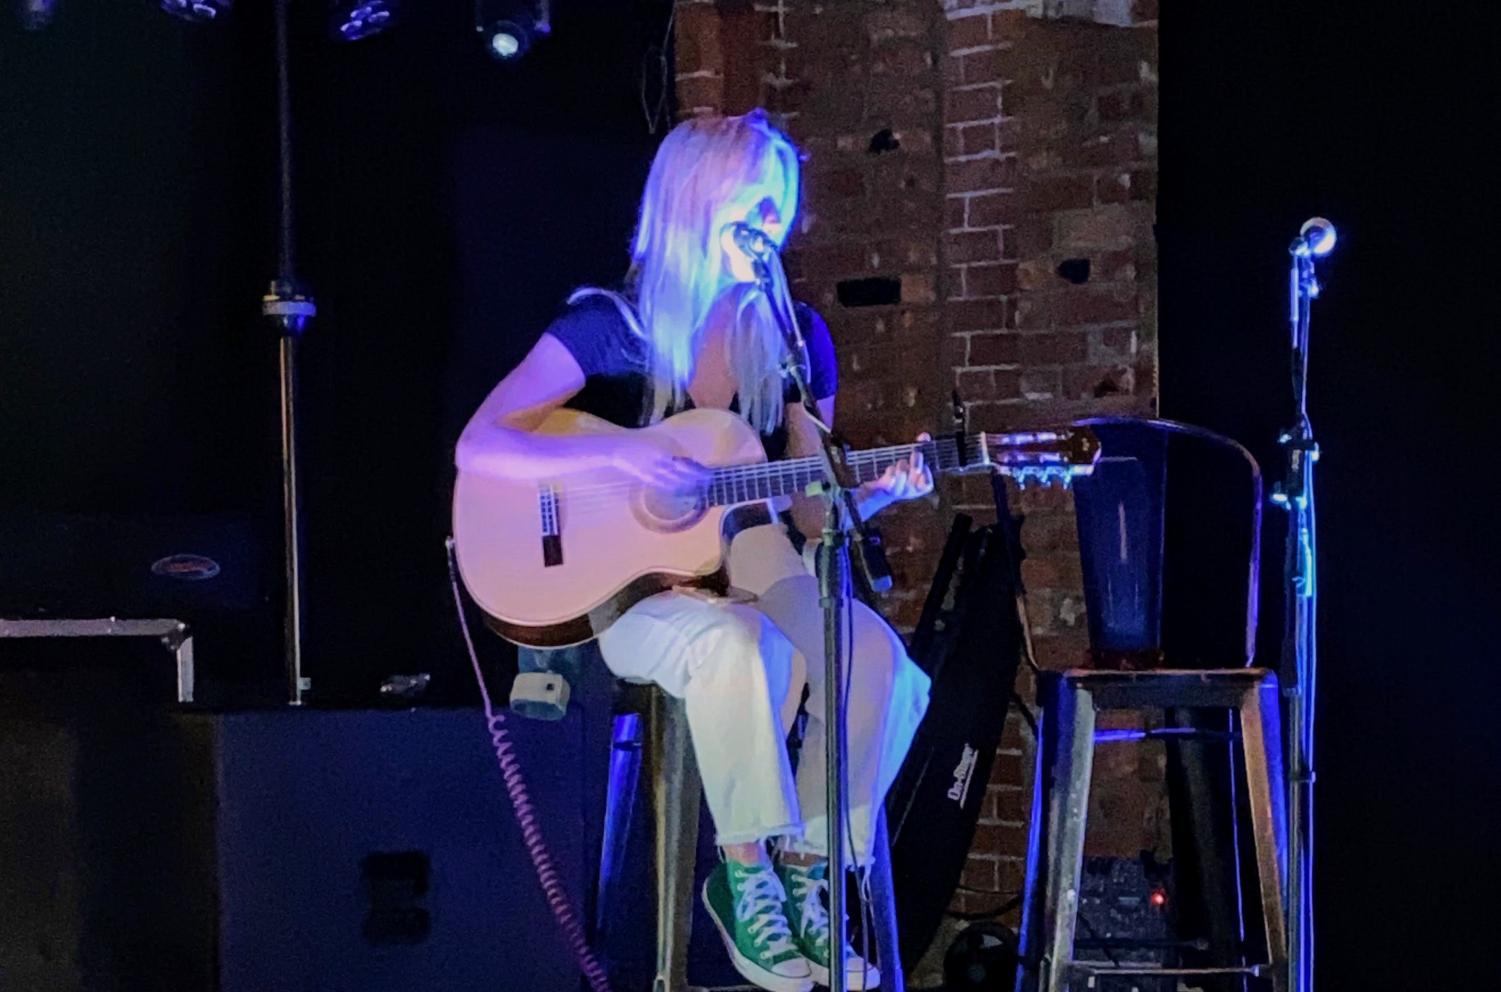 Olivia Willhite lights up the stage and connects with the audience at Bombay Bar and Grill.